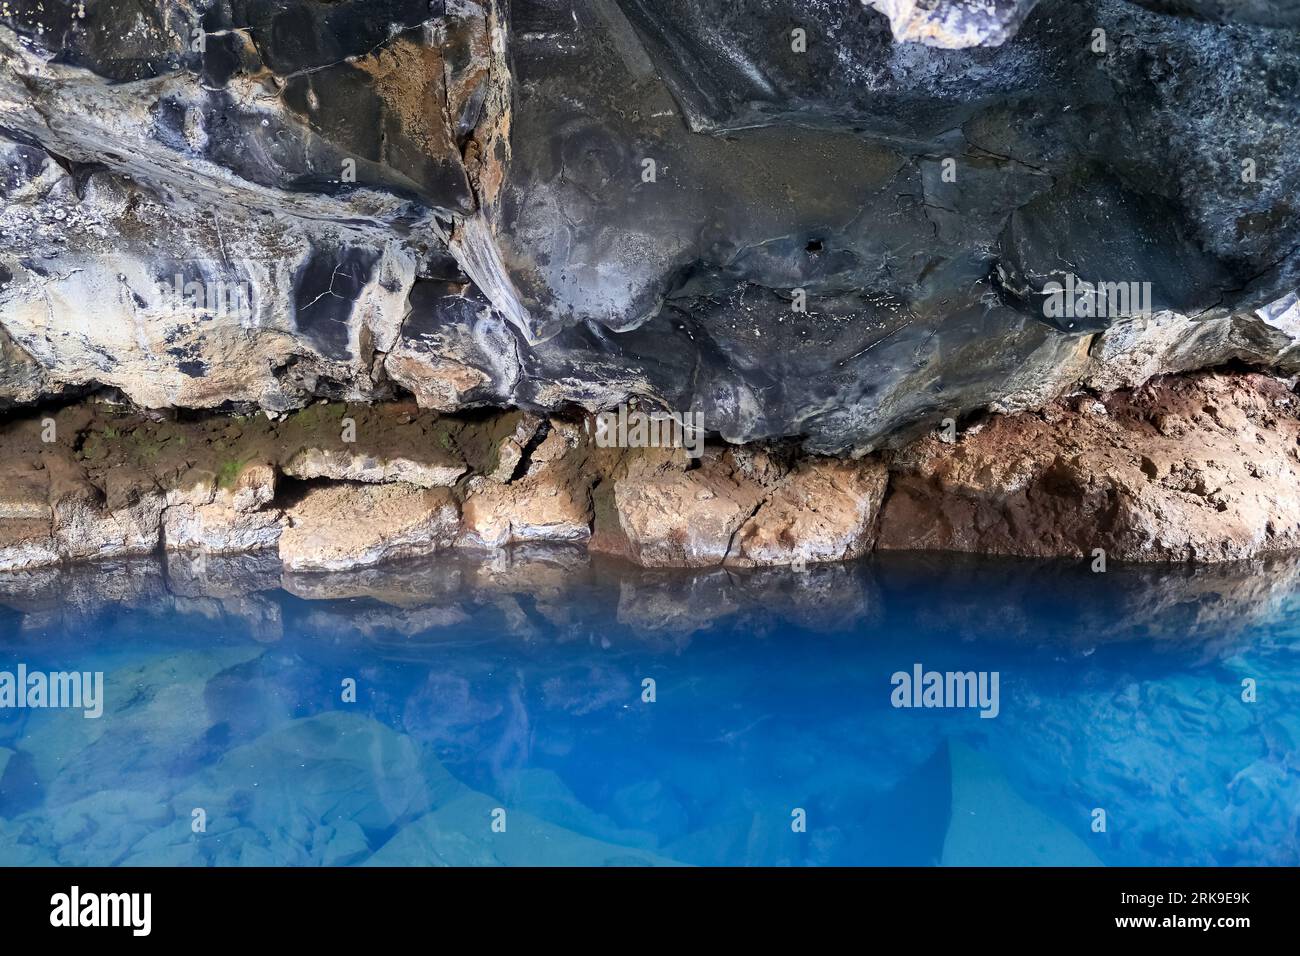 View Into Grjotagja Lava Cave With Crystal Clear Blue Water Stock Photo